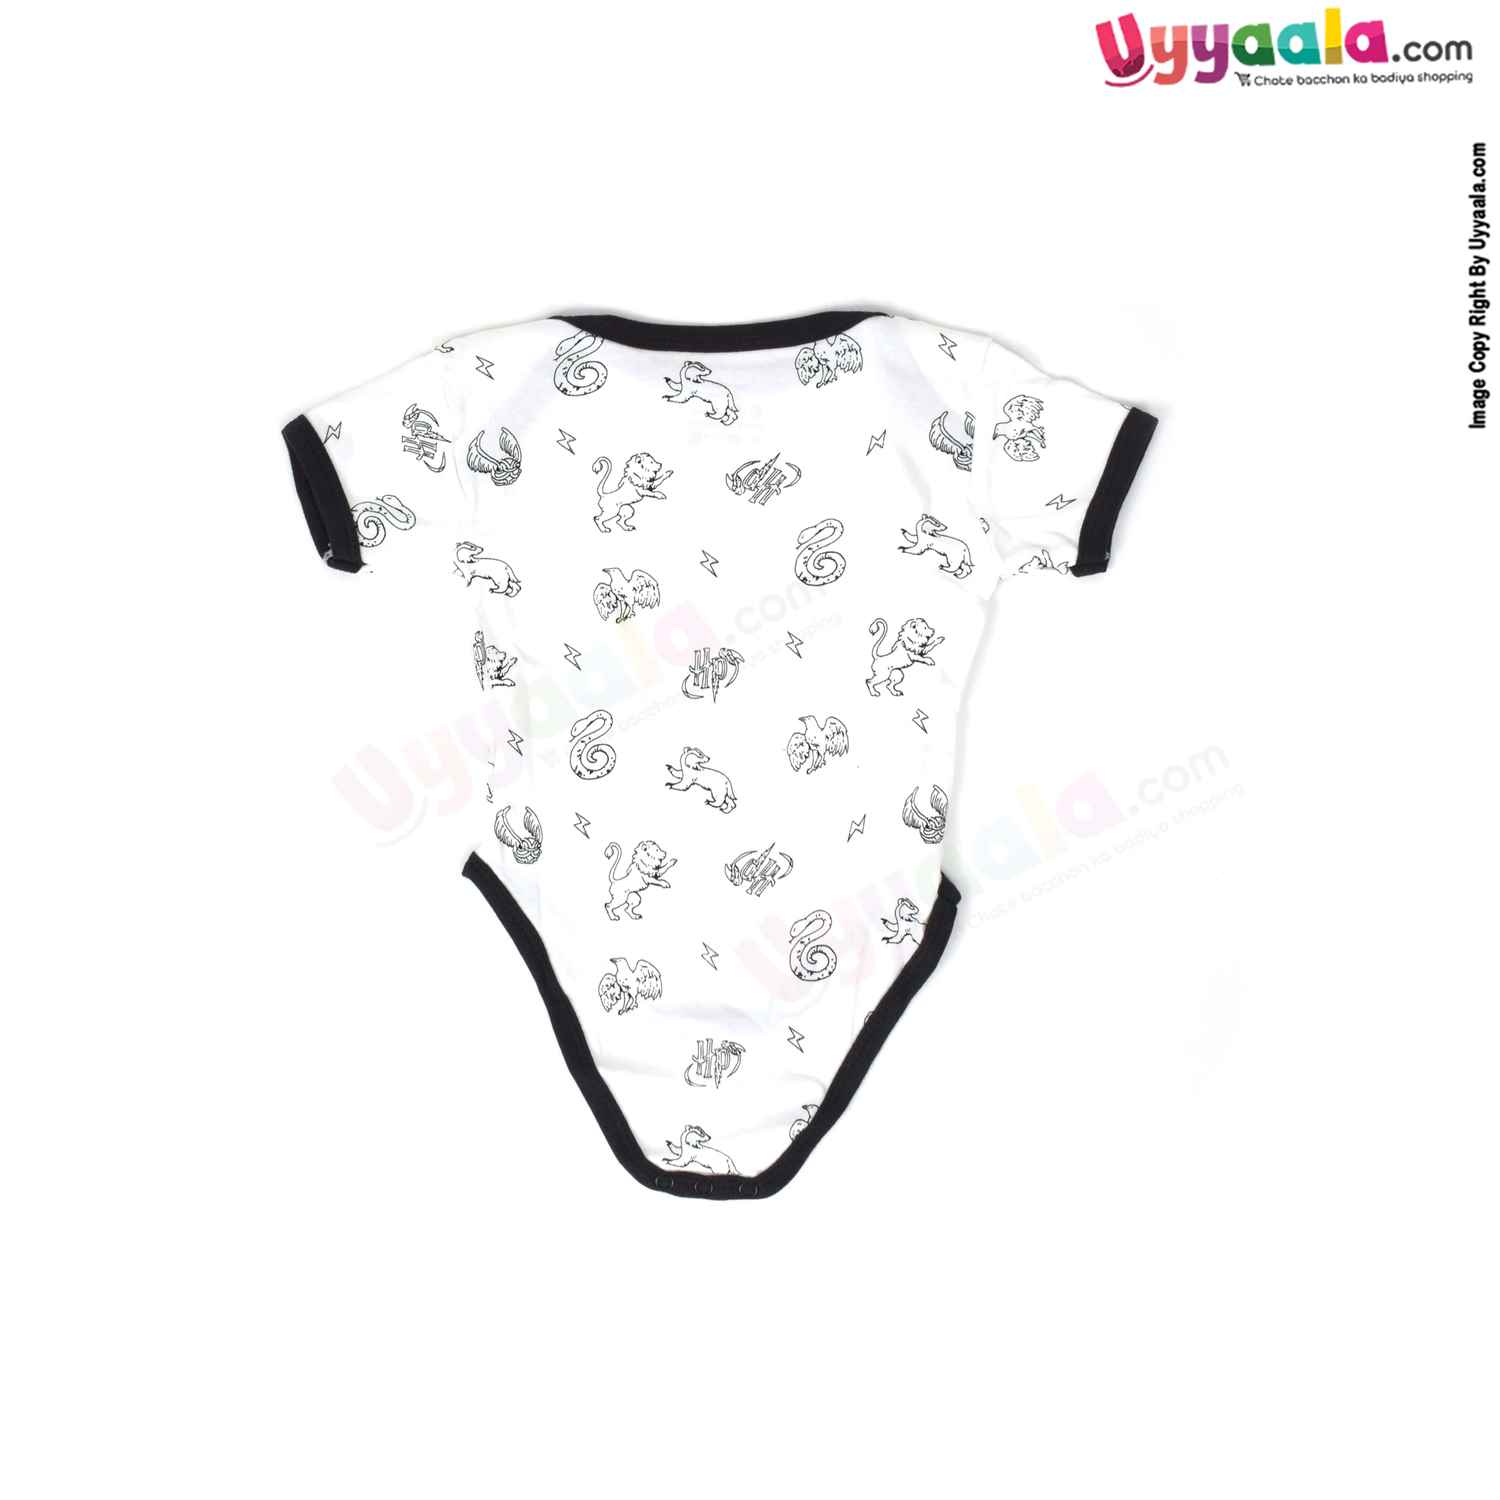 Precious One Short Sleeve Body Suit 100% Soft Hosiery Cotton - White with black borders Animals Print (6-9M)